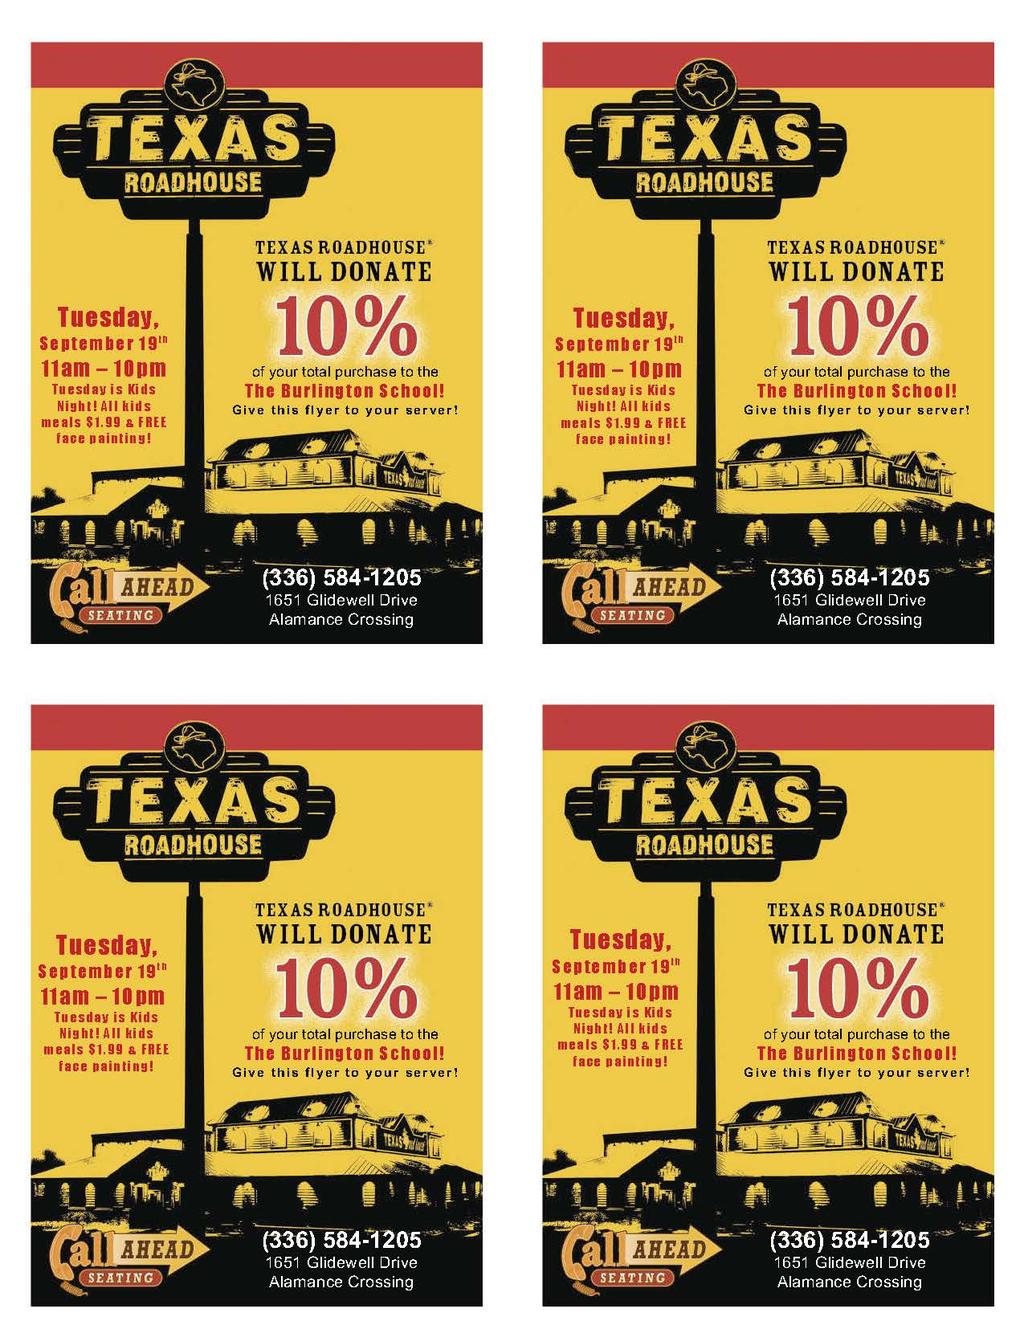 SPIRIT NIGHT @ TEXAS ROADHOUSE Please join us for our first Spirit Night of the school year on Tuesday, September 19 at